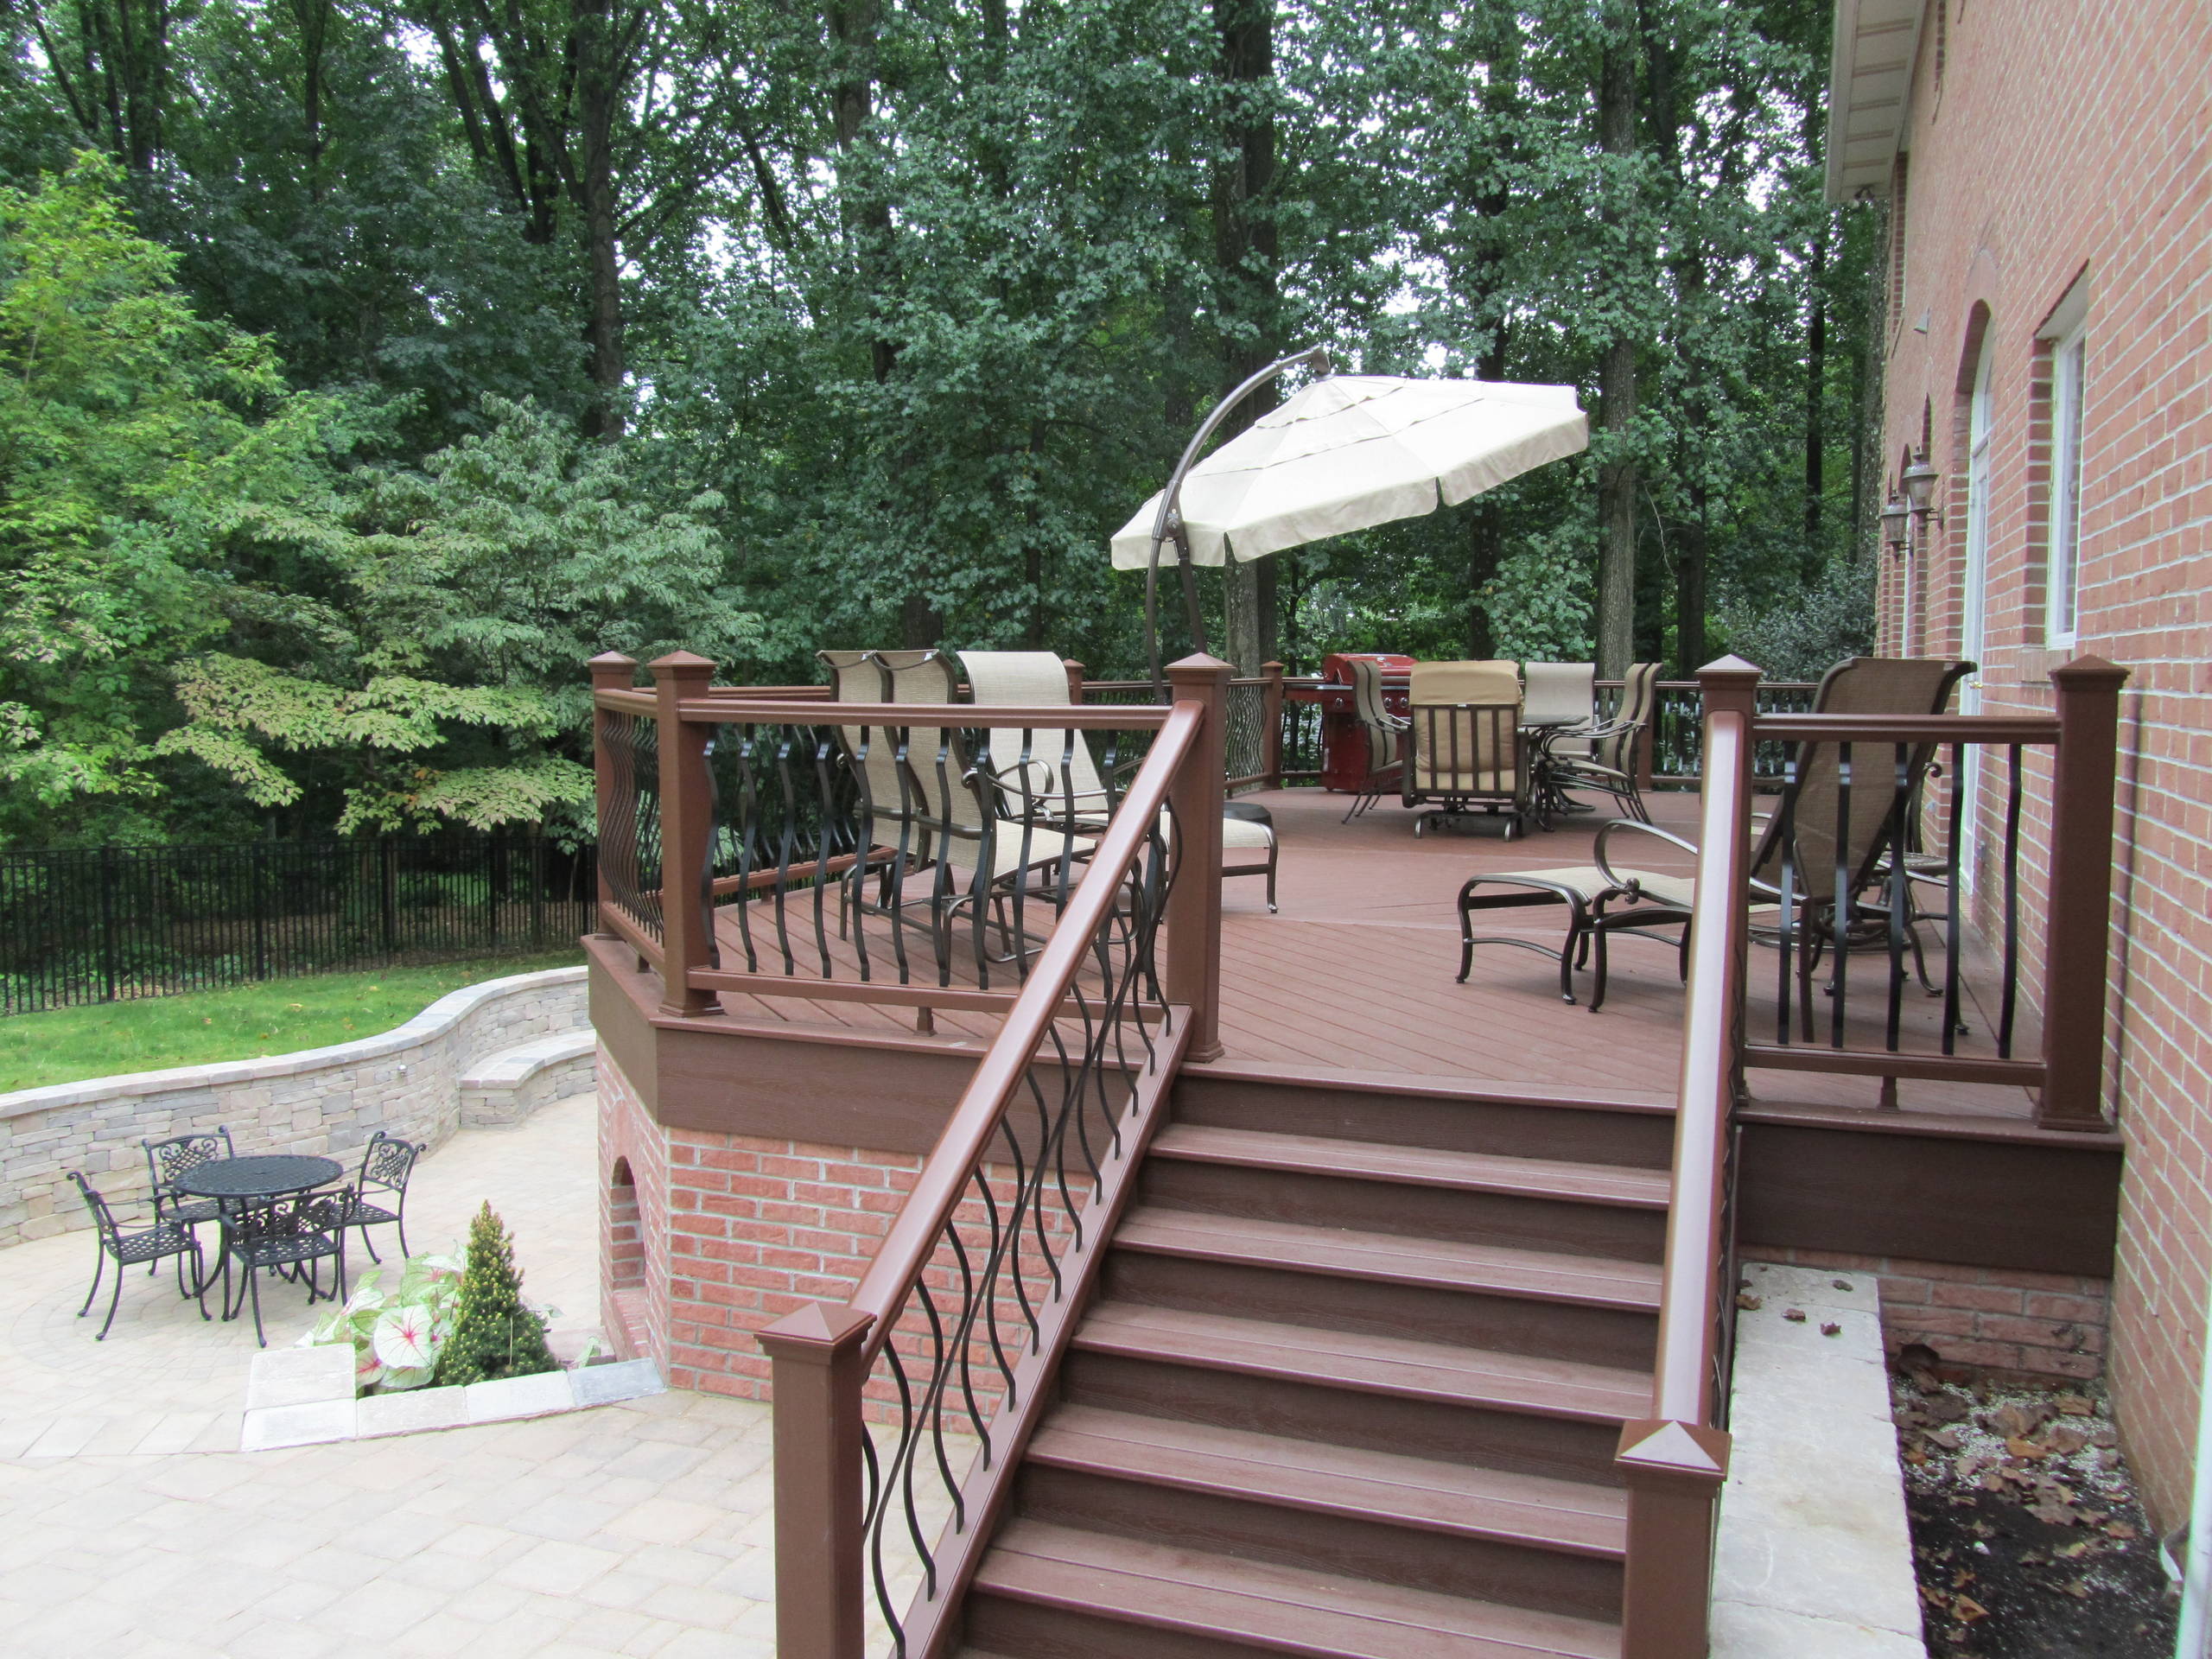 Lutherville Outdoor Living Environment